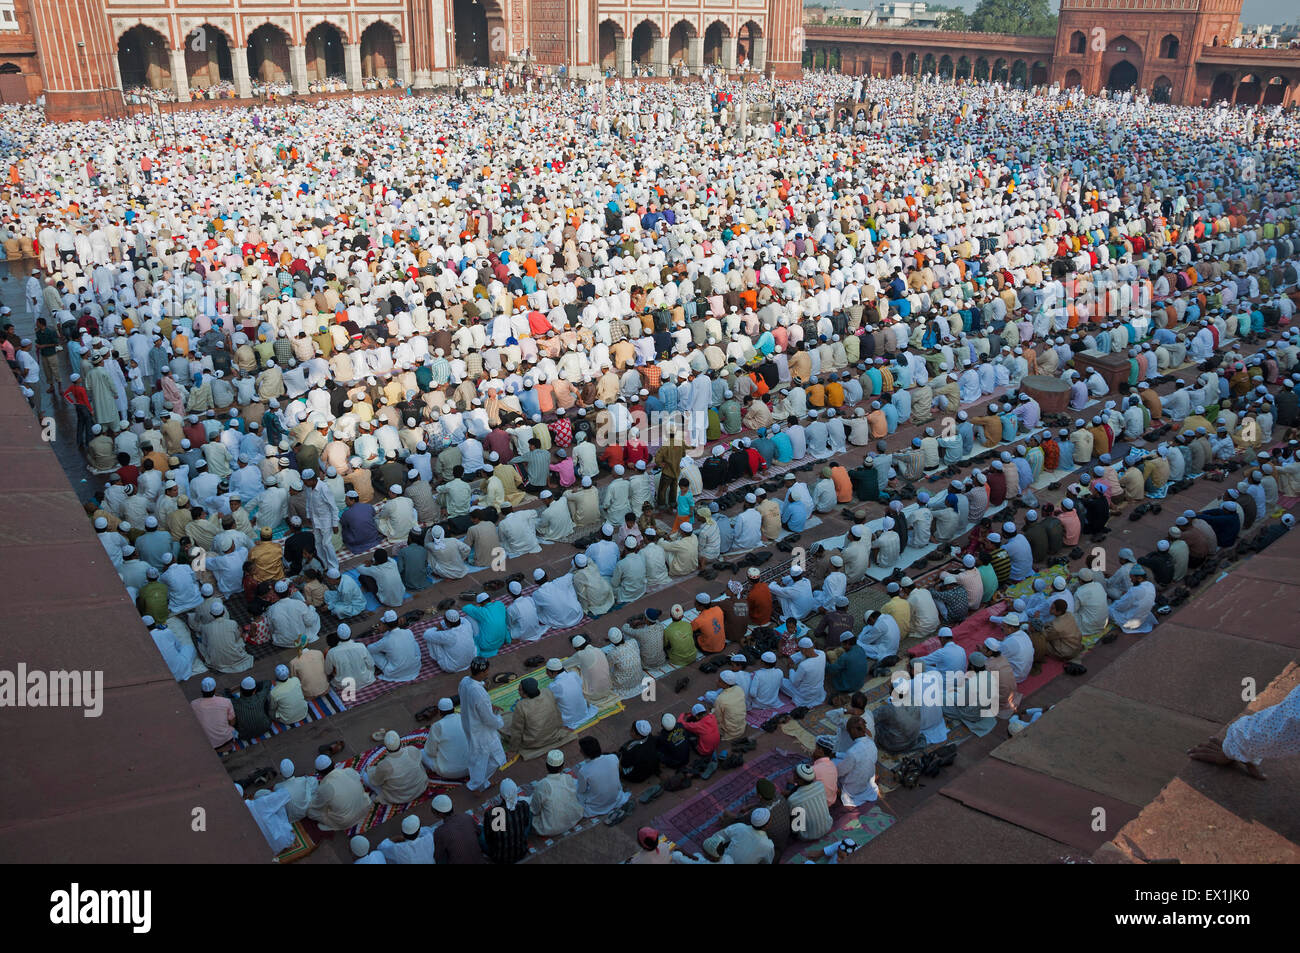 Festival of Eid-ul-fitr being celebrated at the Jama Masjid mosque in old Delhi, India. Stock Photo